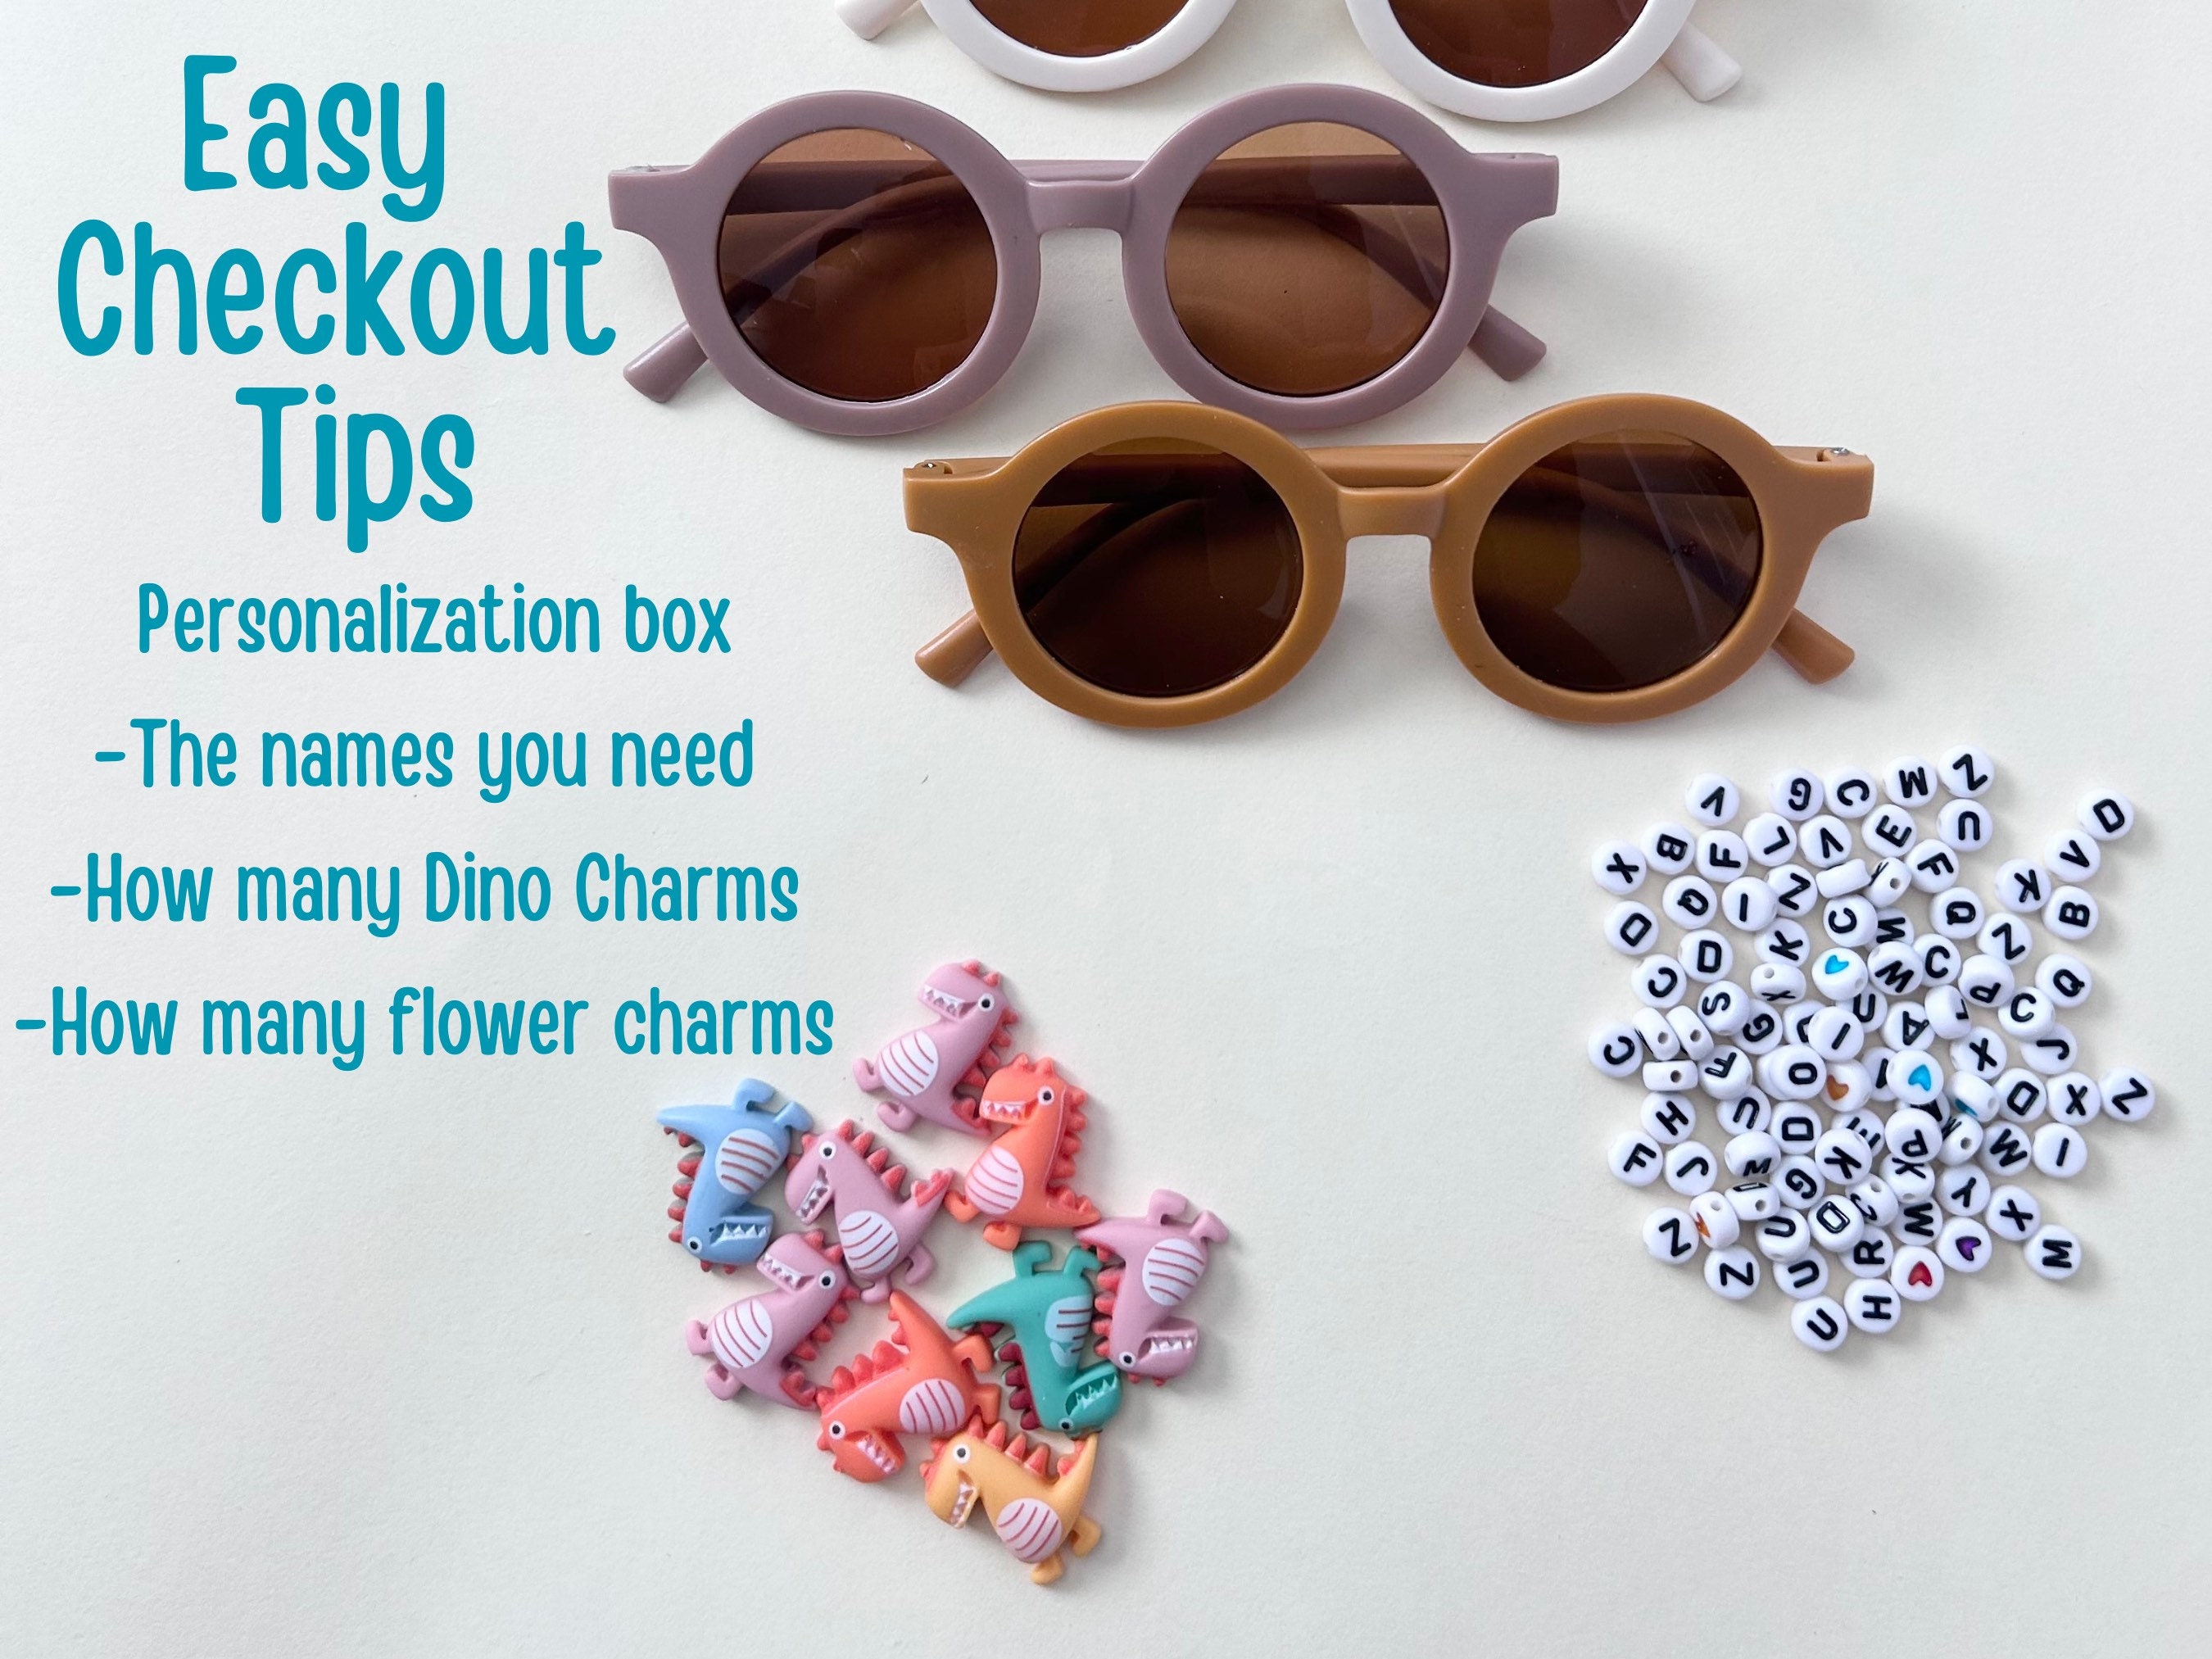 Make your own custom sunglasses from recycled plastic with FOS